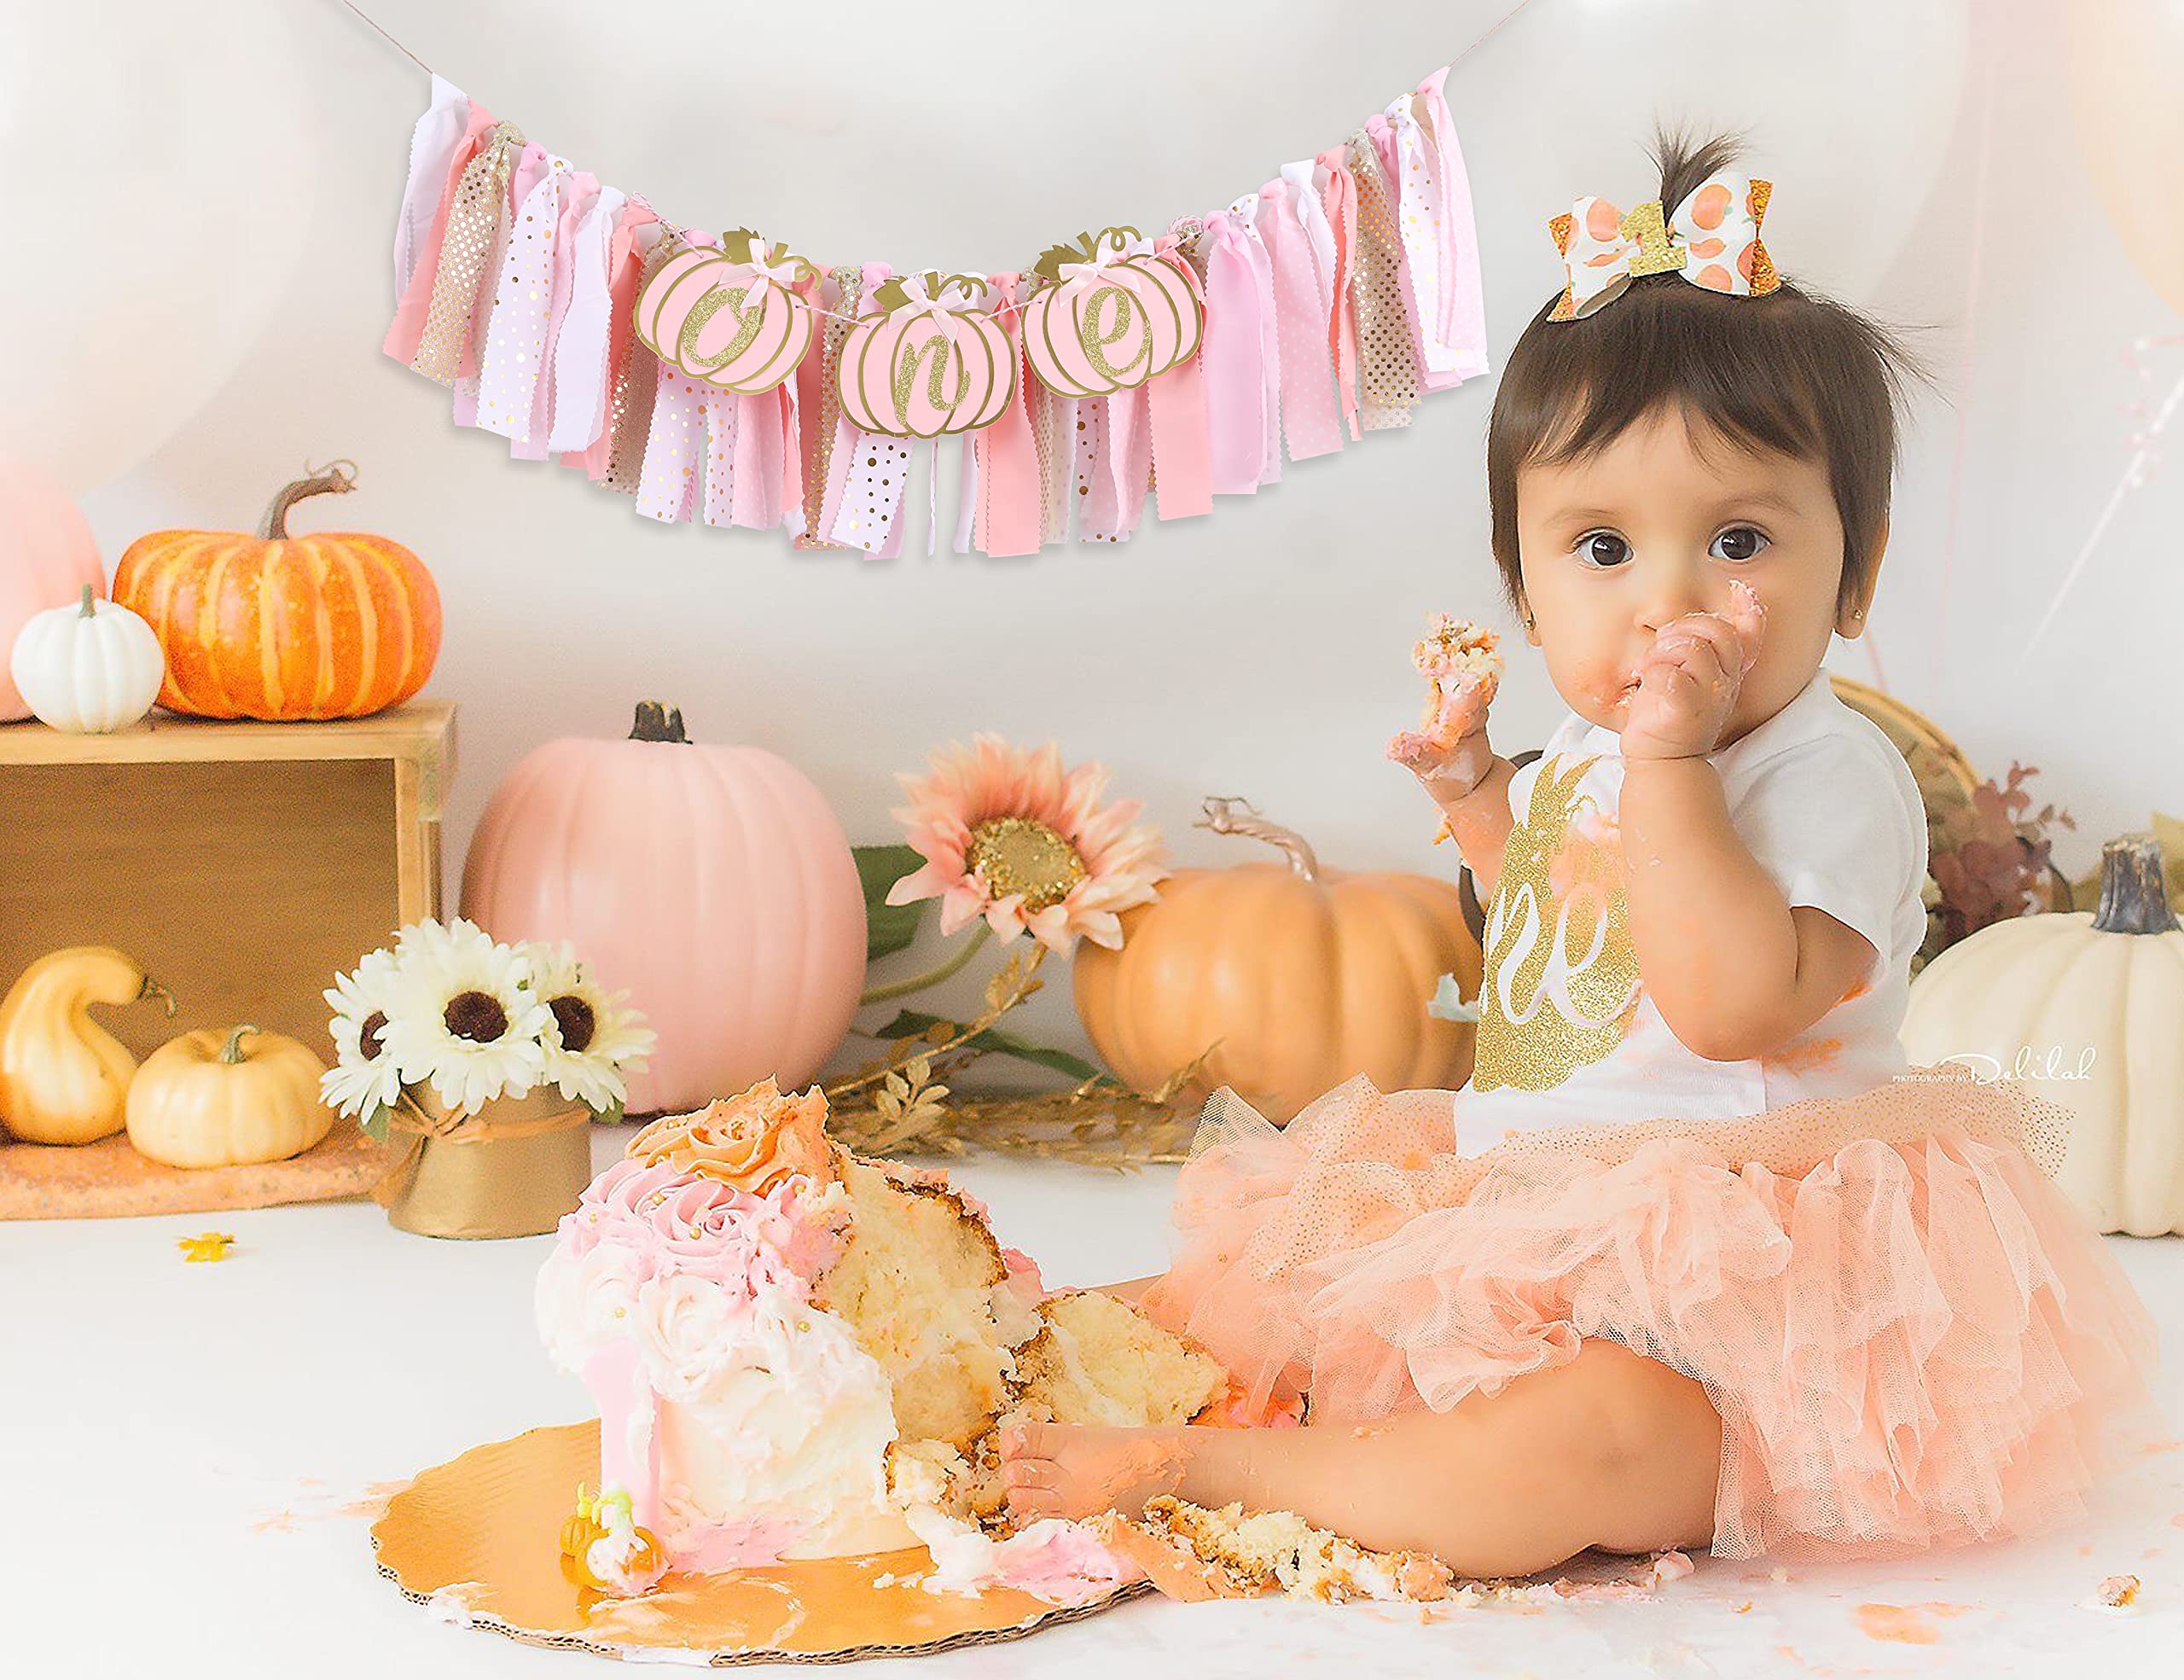 Pumpkin Highchair Banner for 1st Birthday - Our Little Pumpkin Banner, Pumpkin Birthday Party Decorations, Pink Gold First Birthday Banner, Baby Shower Decorations for Baby Girl